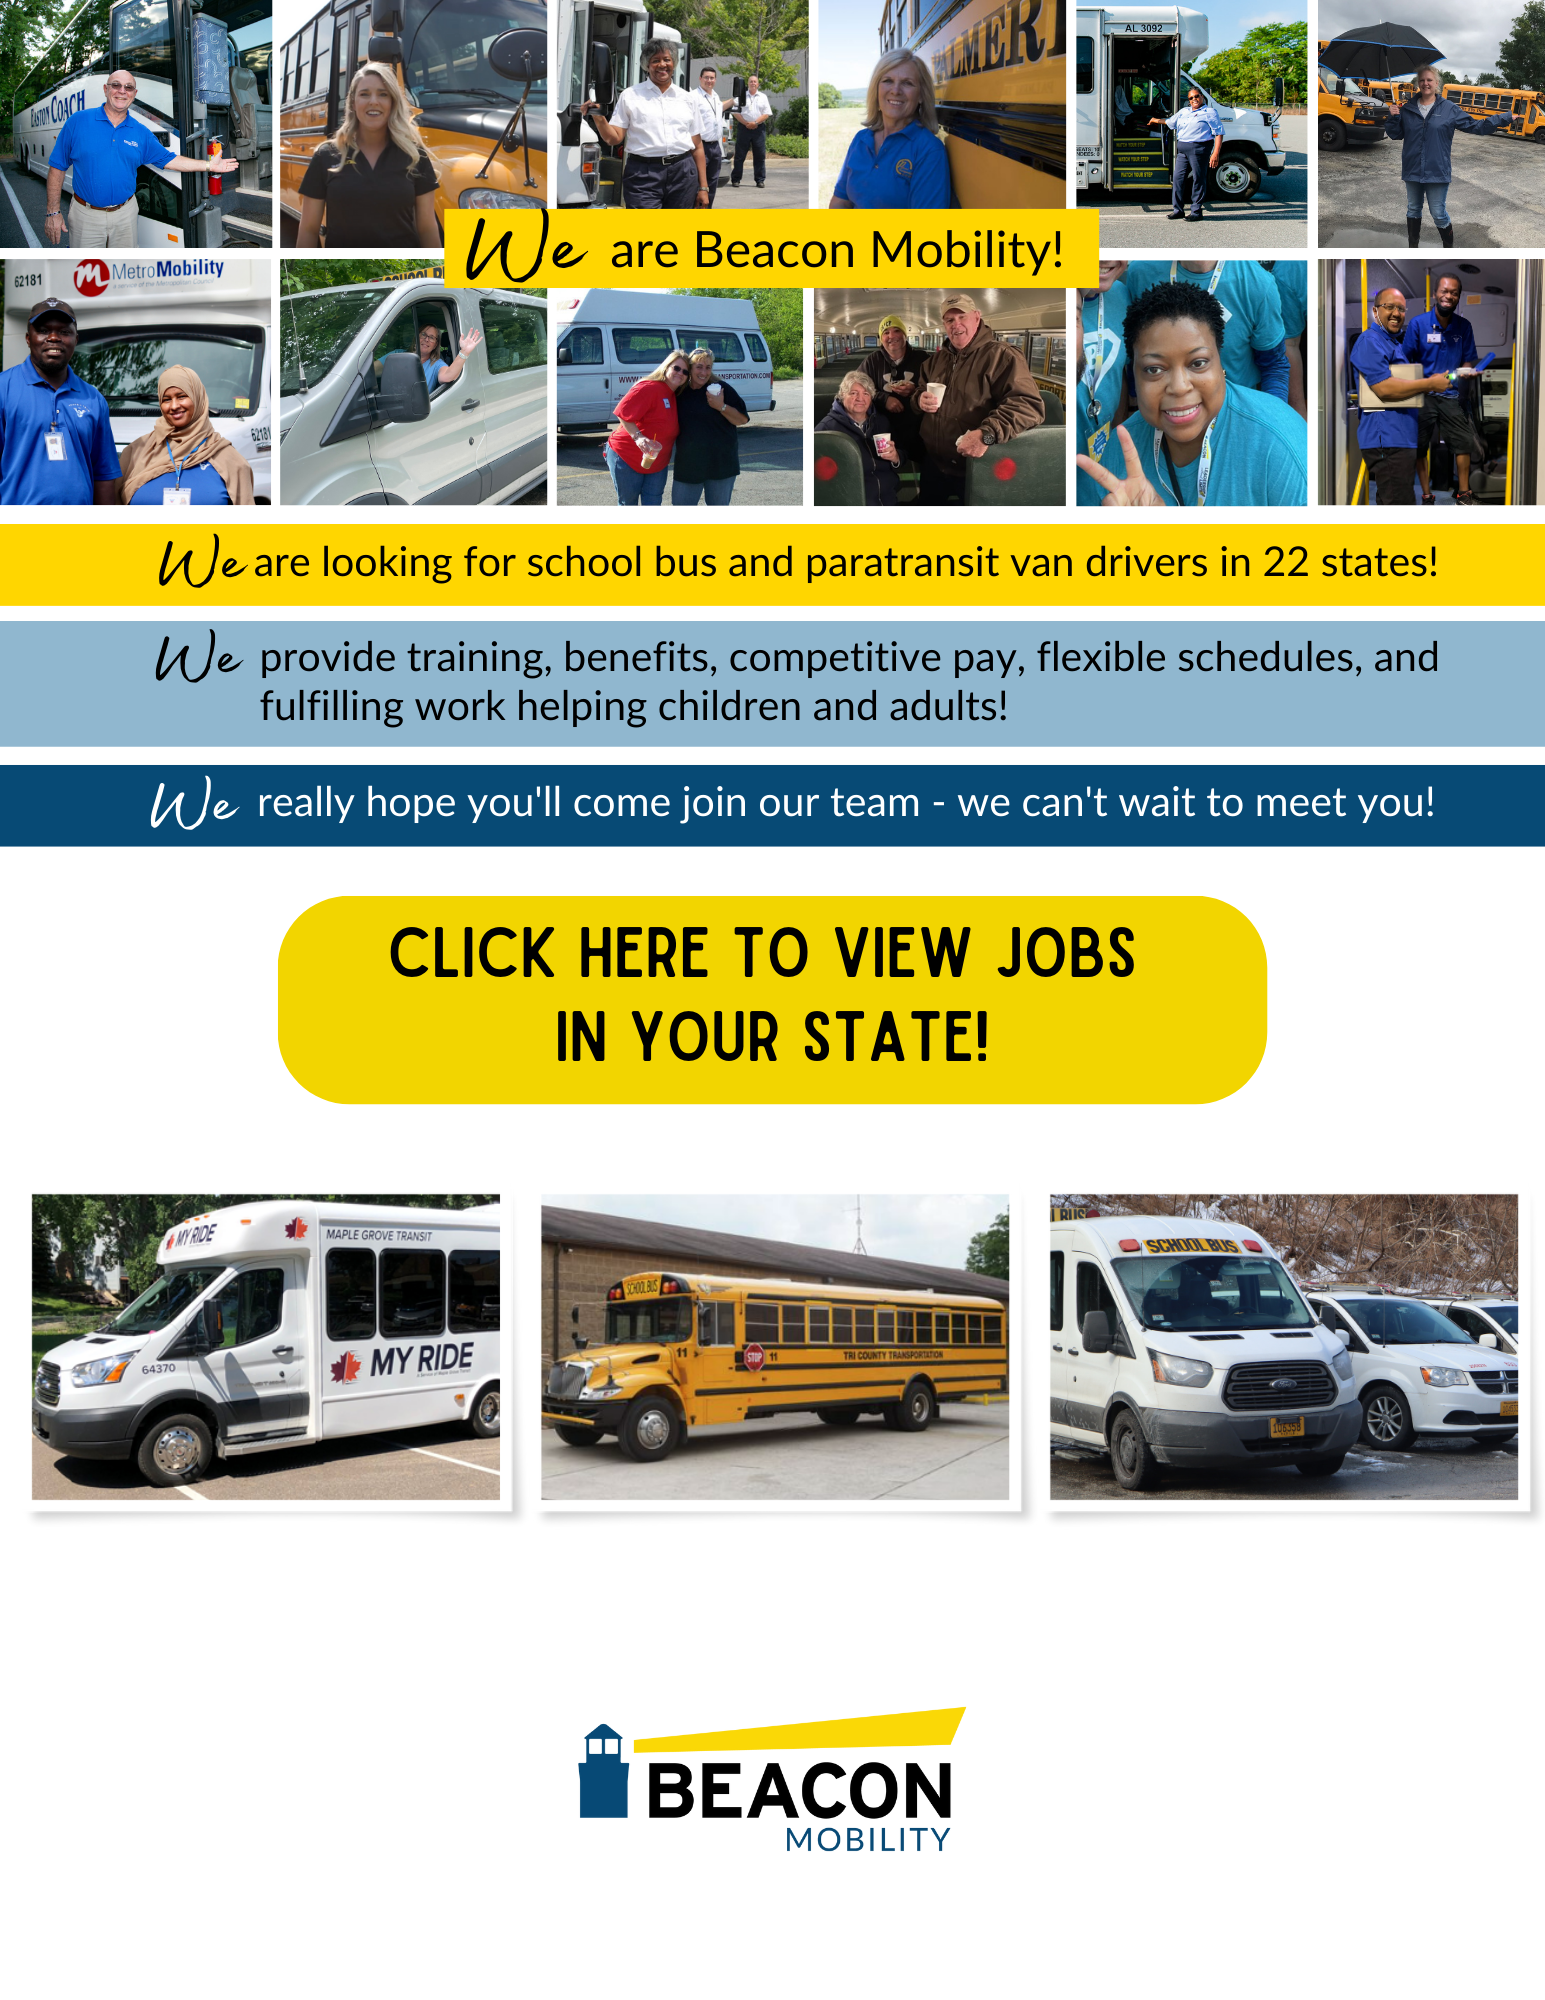 Bus Driver | Part of the Beacon Mobility family | Click here to view jobs in your state!